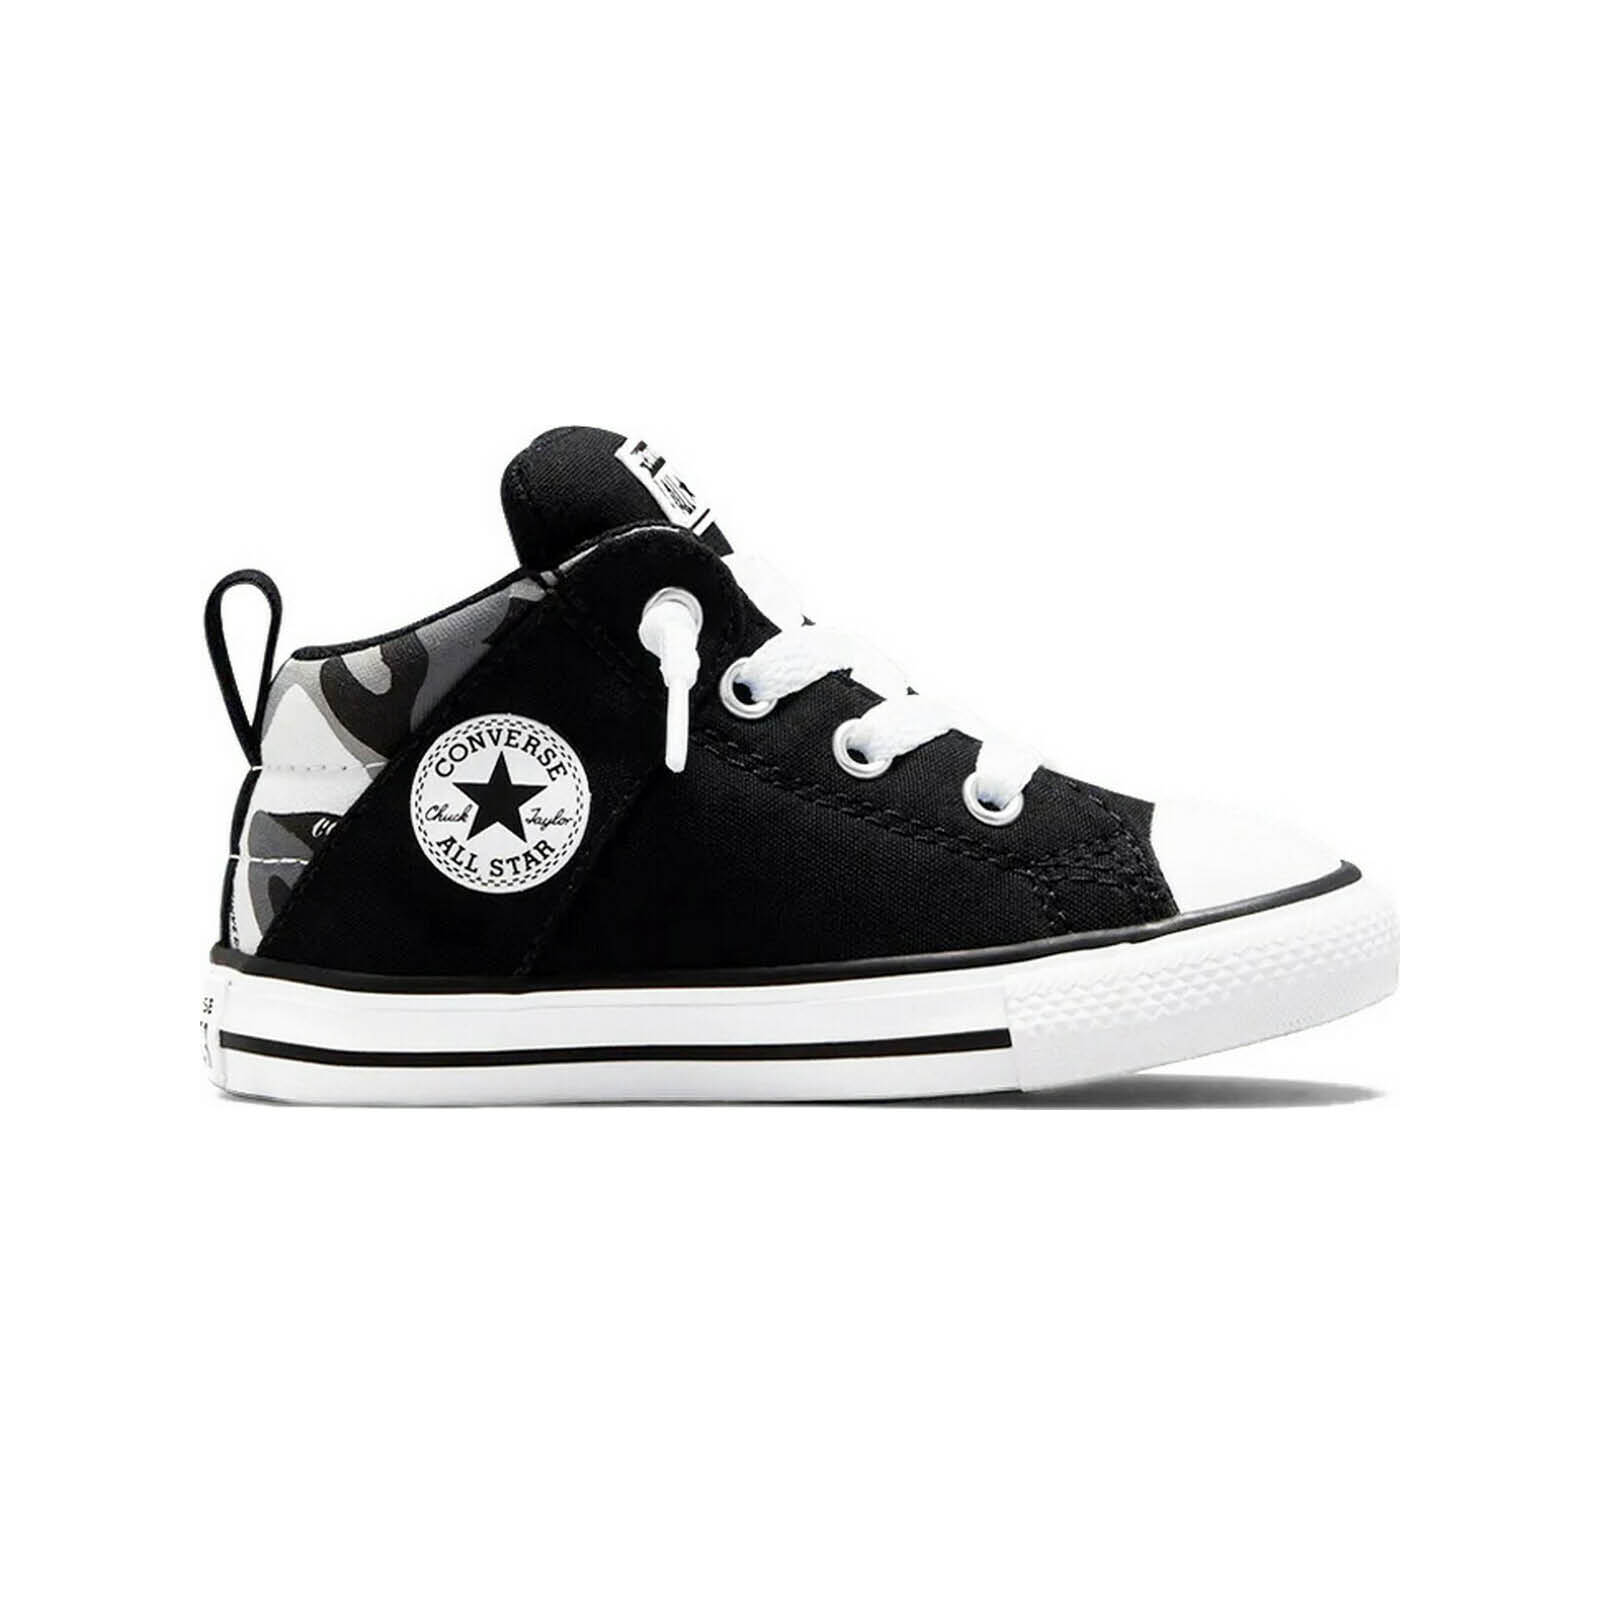 Converse - CHUCK TAYLOR ALL STAR AXEL - 001-BLACK/WHITE/THUNDER Παιδικά > Παπούτσια > Sneaker > Παπούτσι Mid Cut